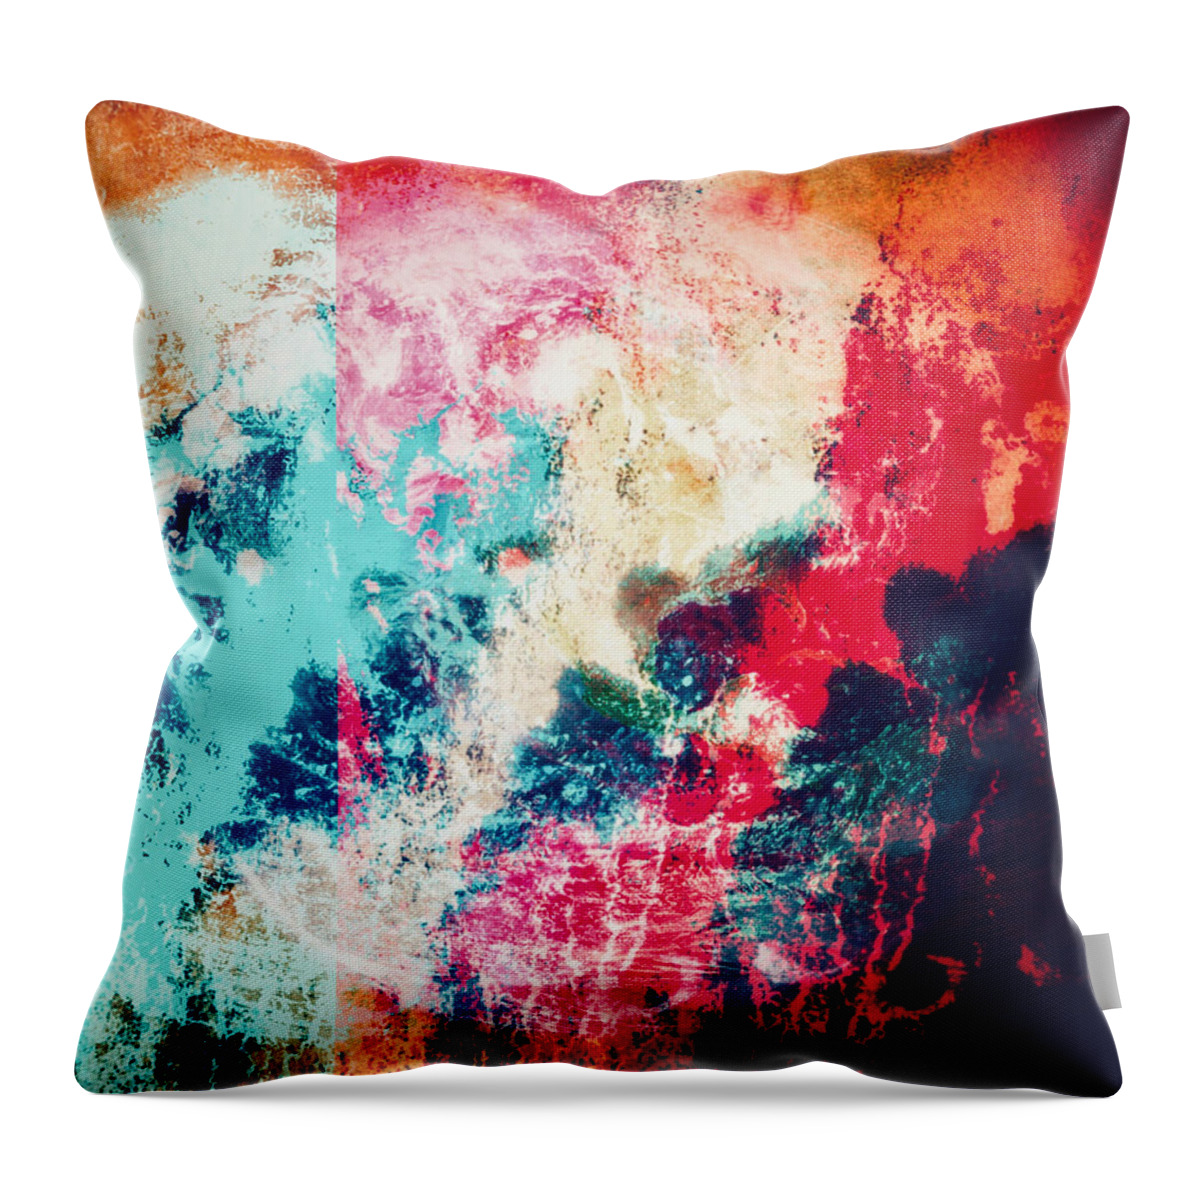 Storms And Rainbows Throw Pillow featuring the digital art Storms and Rainbows by Canessa Thomas